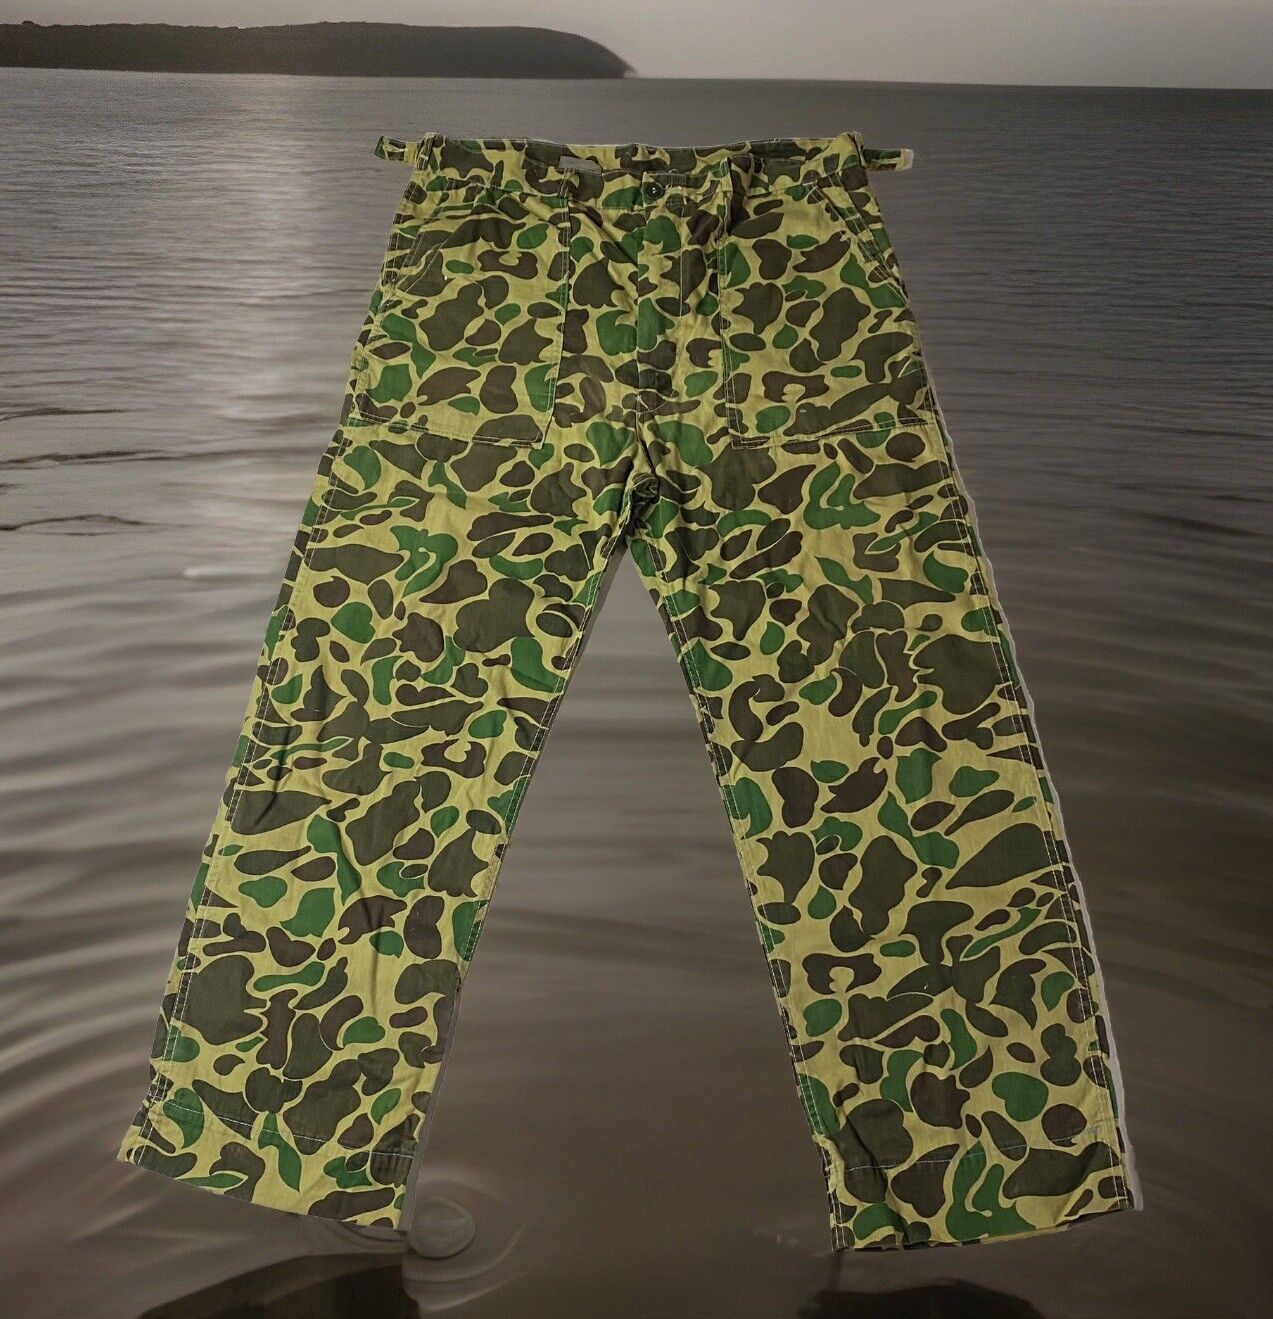 Vintage 1960s Era Frog Skin Camo Military Pants Trousers Made In Hong Kong